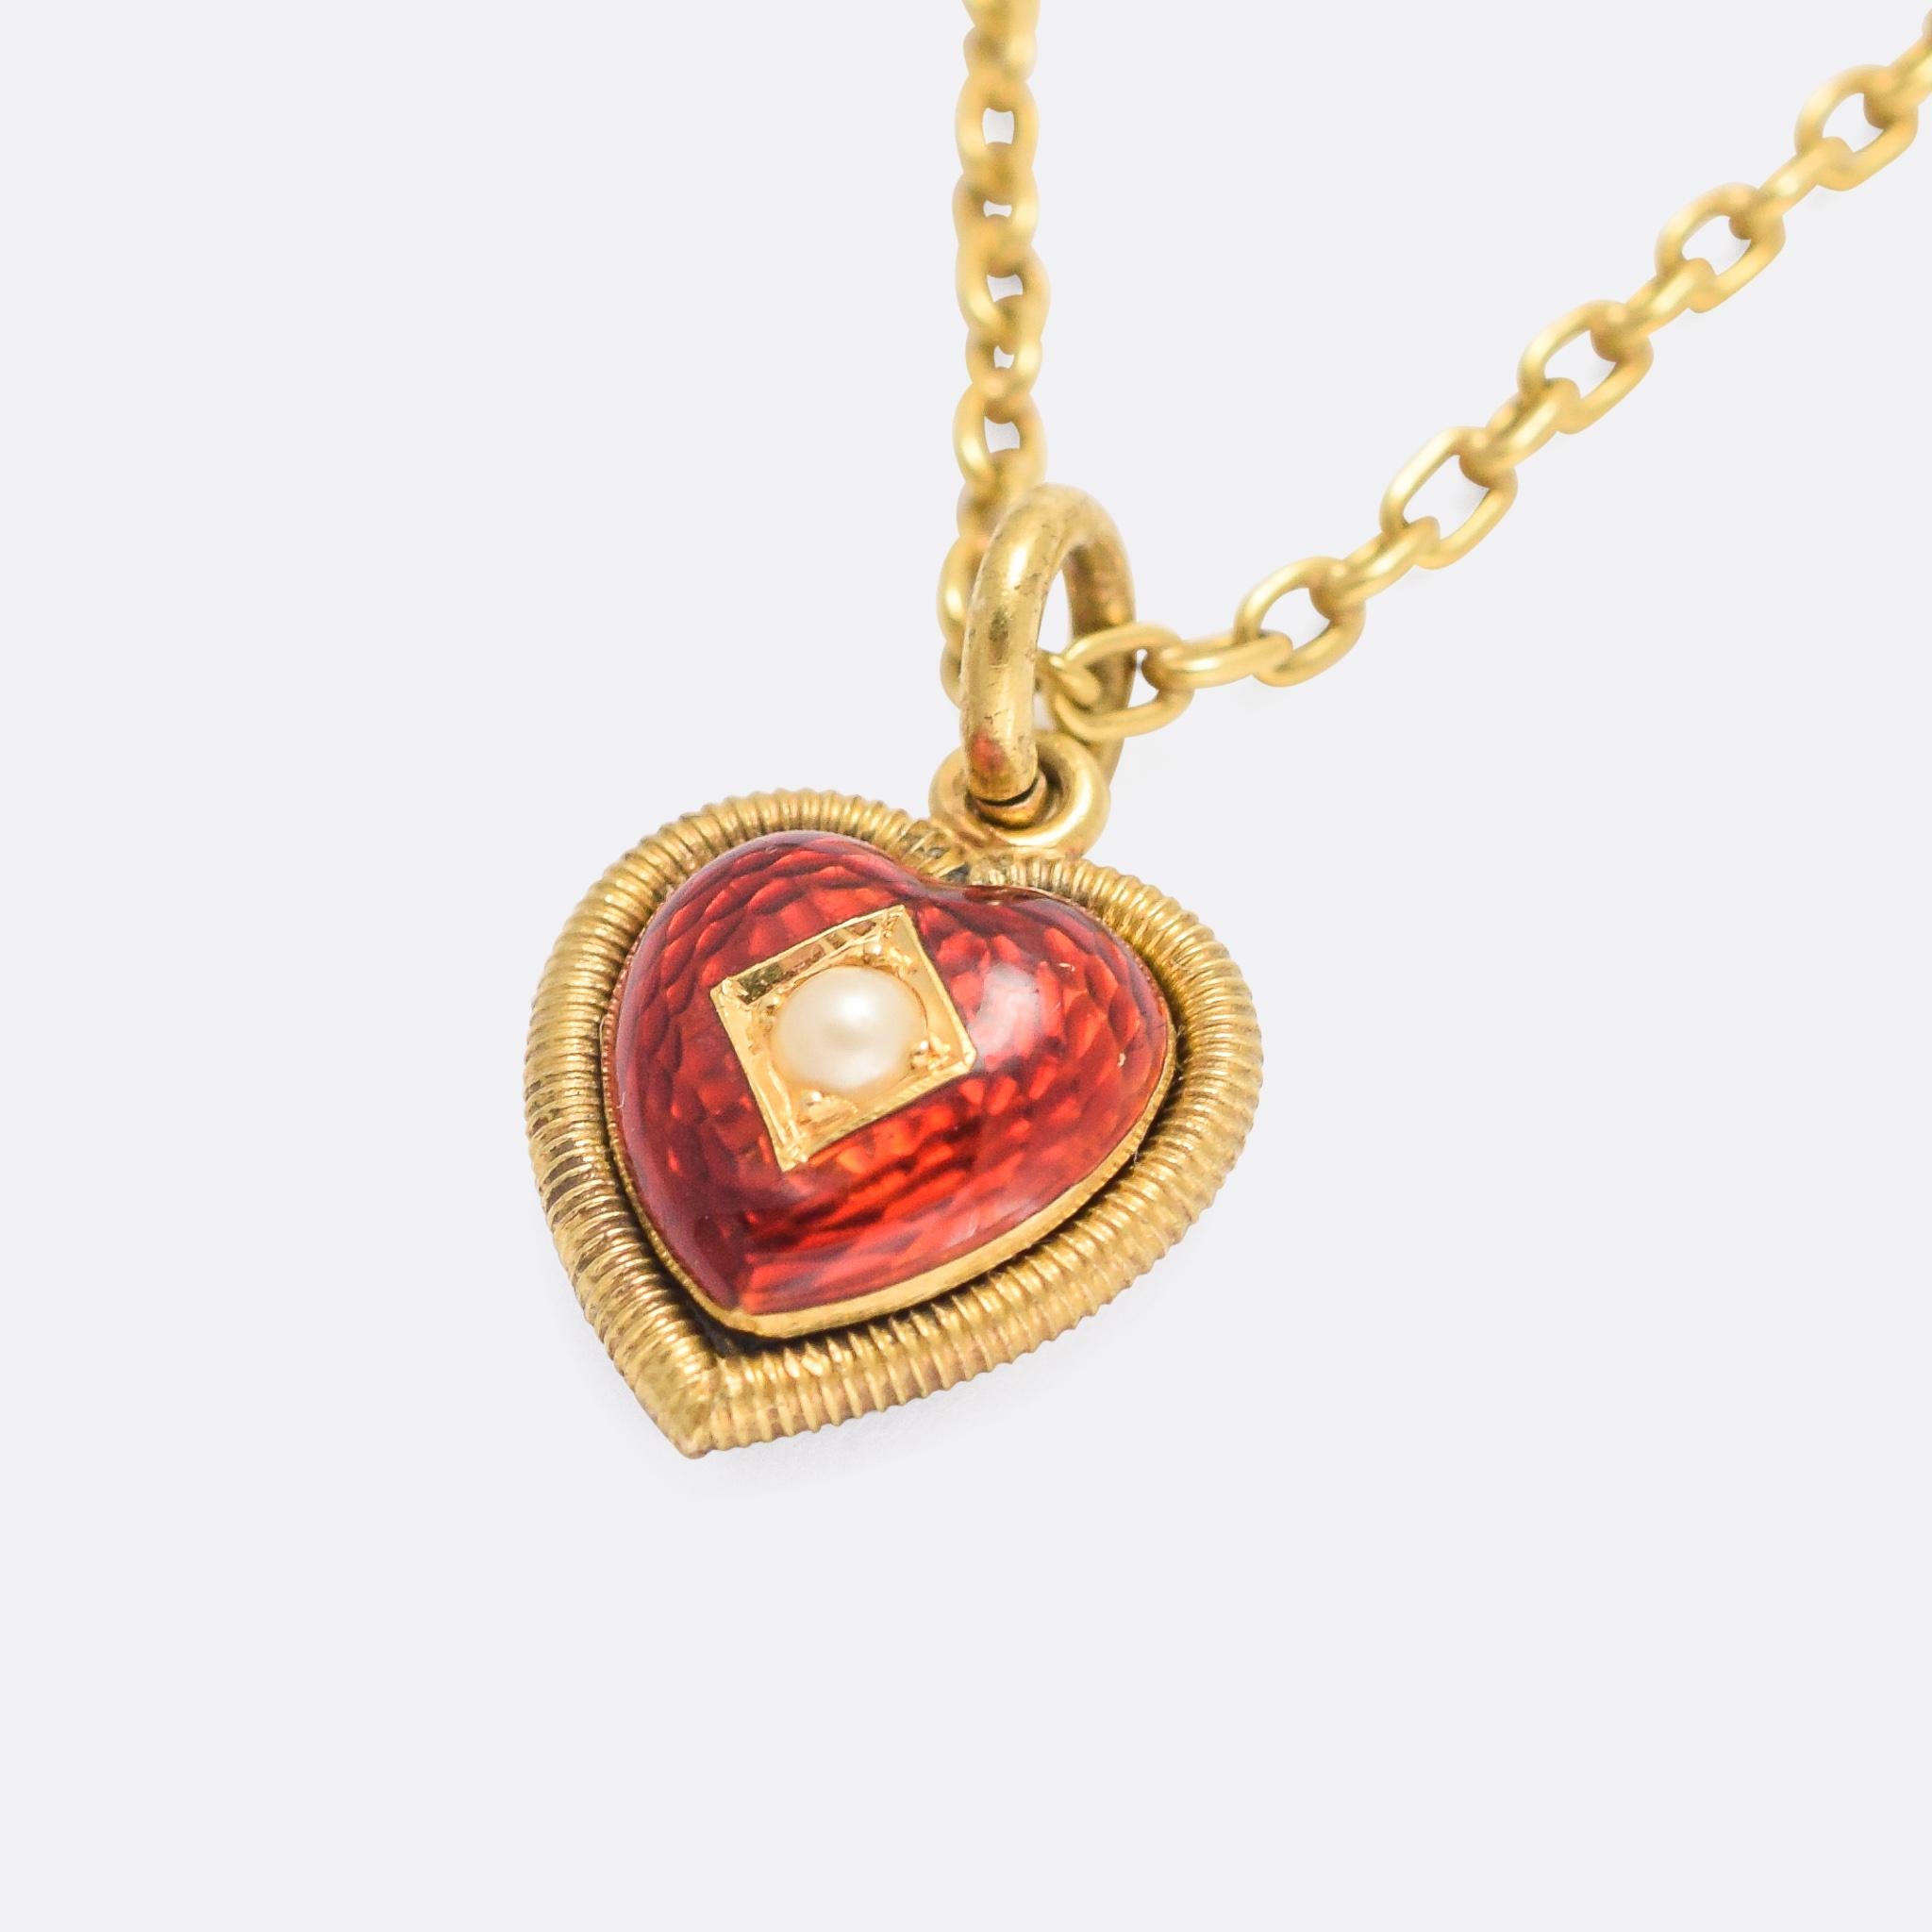 A sweet antique heart locket set with a single pearl and finished in red guilloché enamel. It dates from the late 19th Century, circa 1890, with a ribbed gold surround. The pendant is modelled in 15 karat gold, and offered with a period 18k